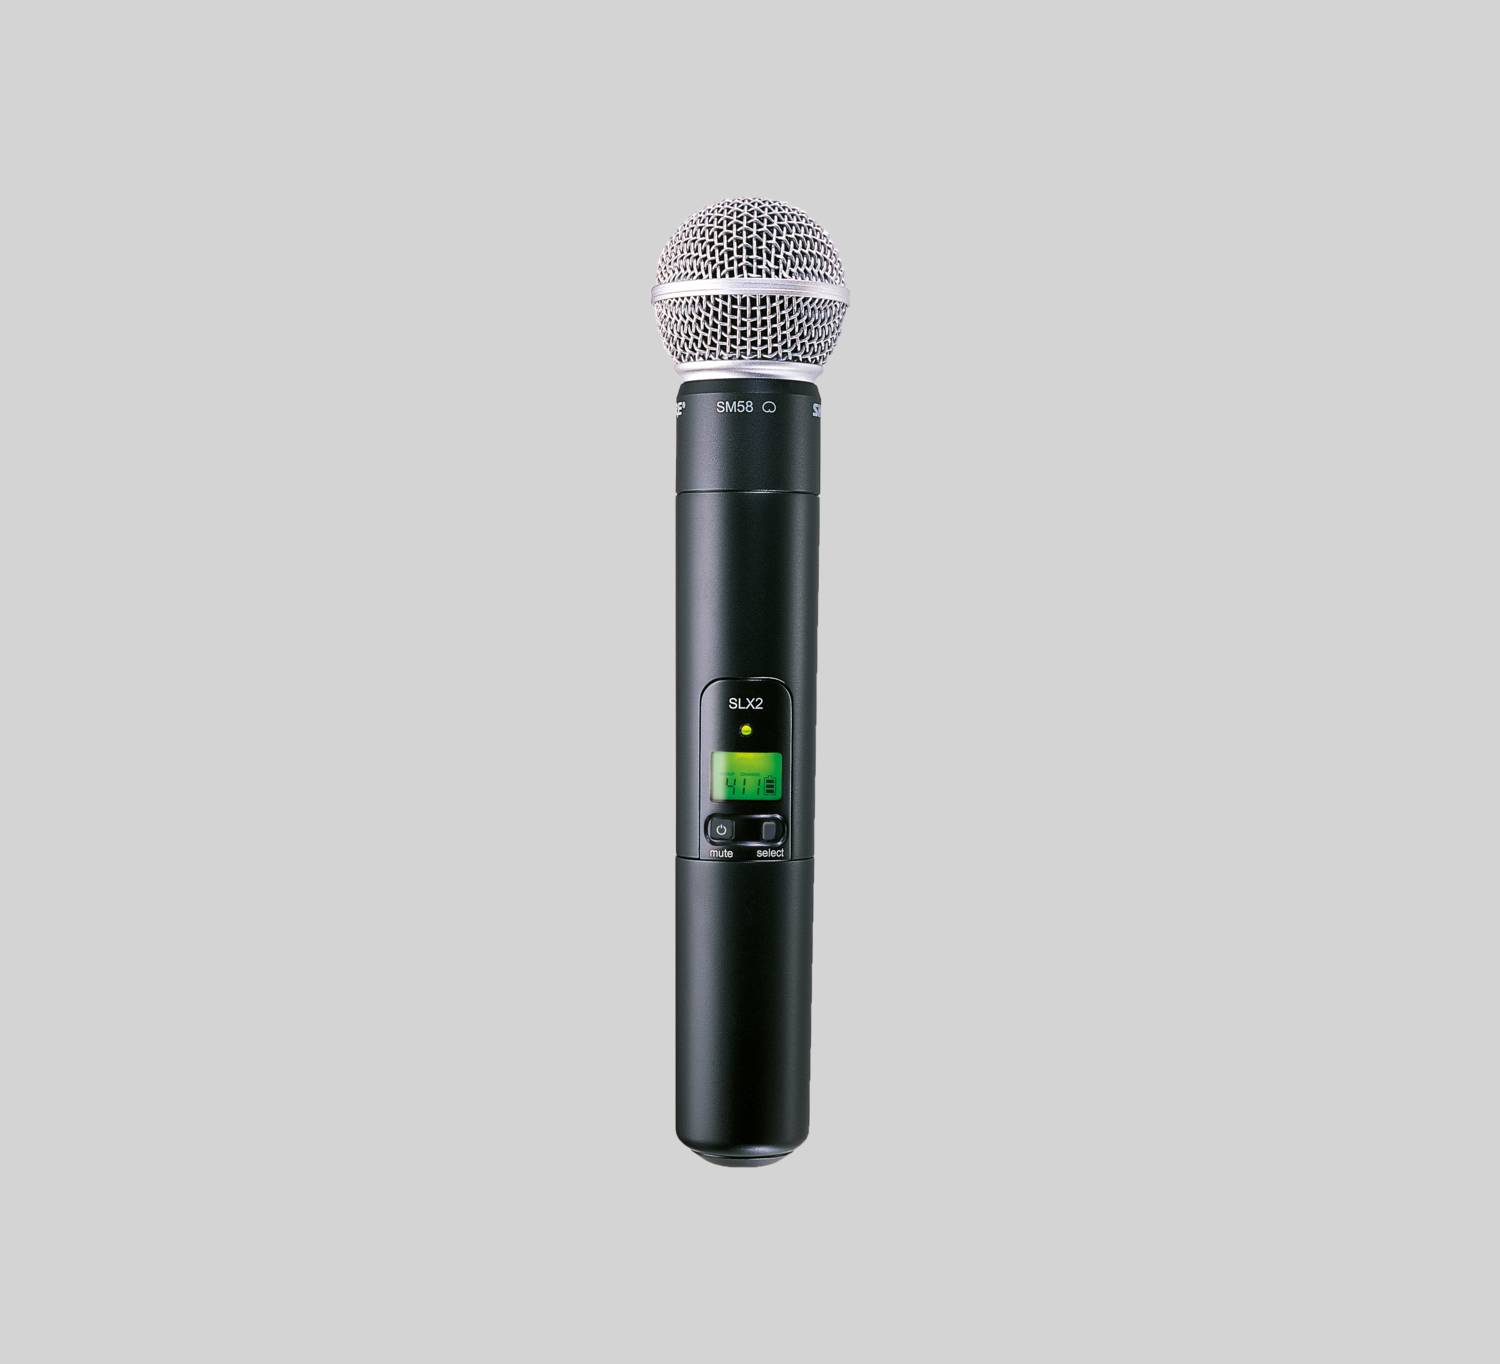 Receiver Sold Separately Shure SLXD2/SM58 Wireless Handheld Microphone Transmitter with SM58 Capsule